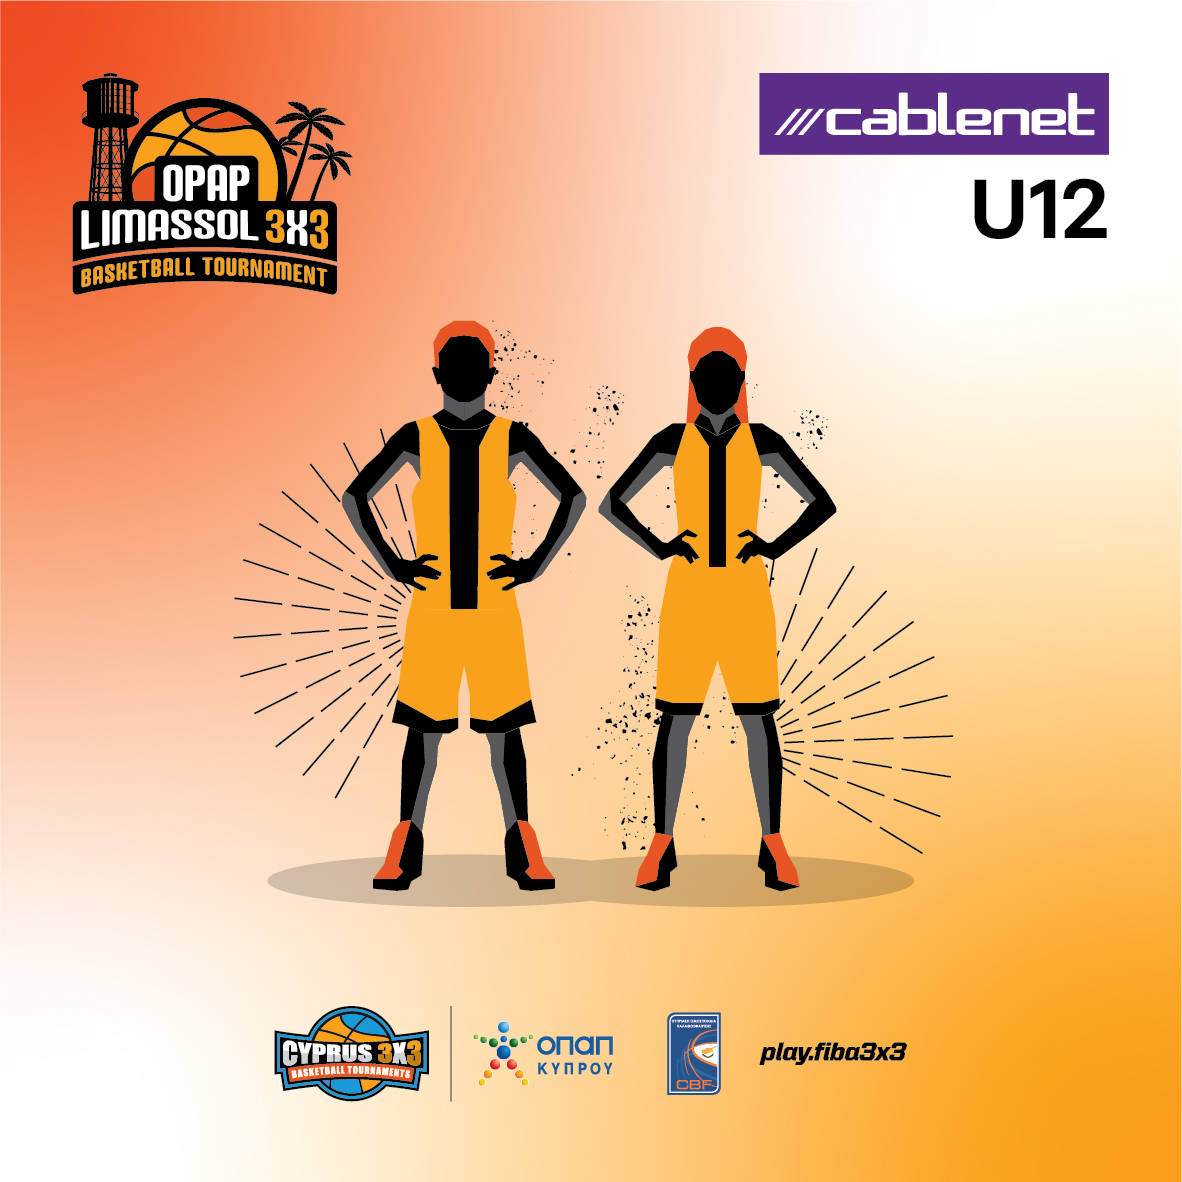 Read more about the article U12 – Limassol 3×3